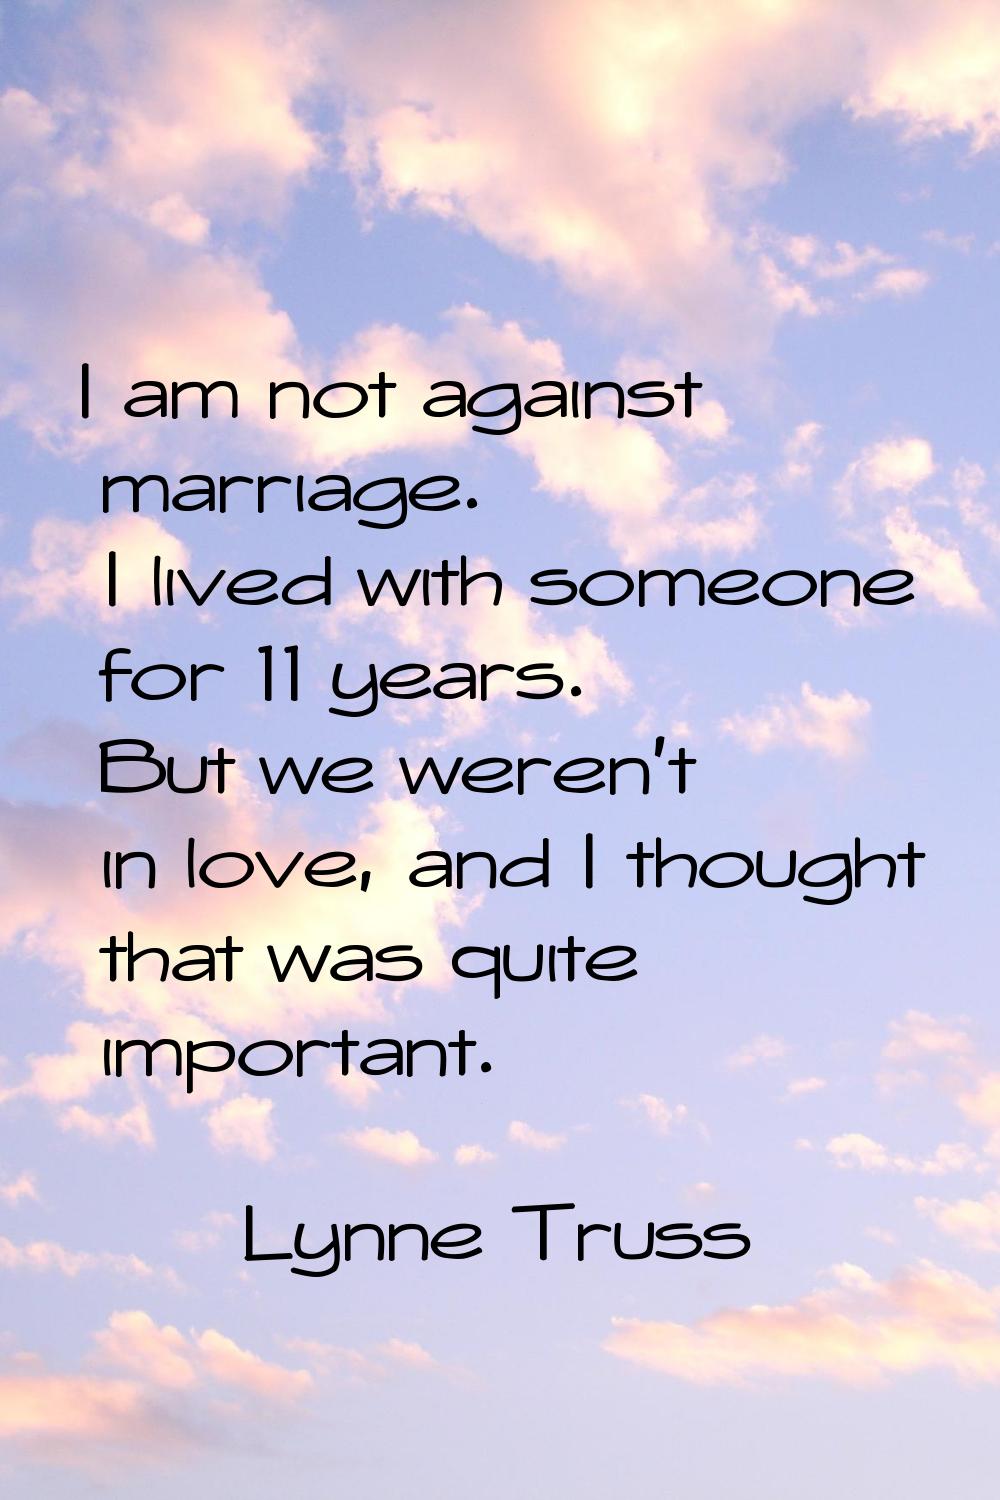 I am not against marriage. I lived with someone for 11 years. But we weren't in love, and I thought